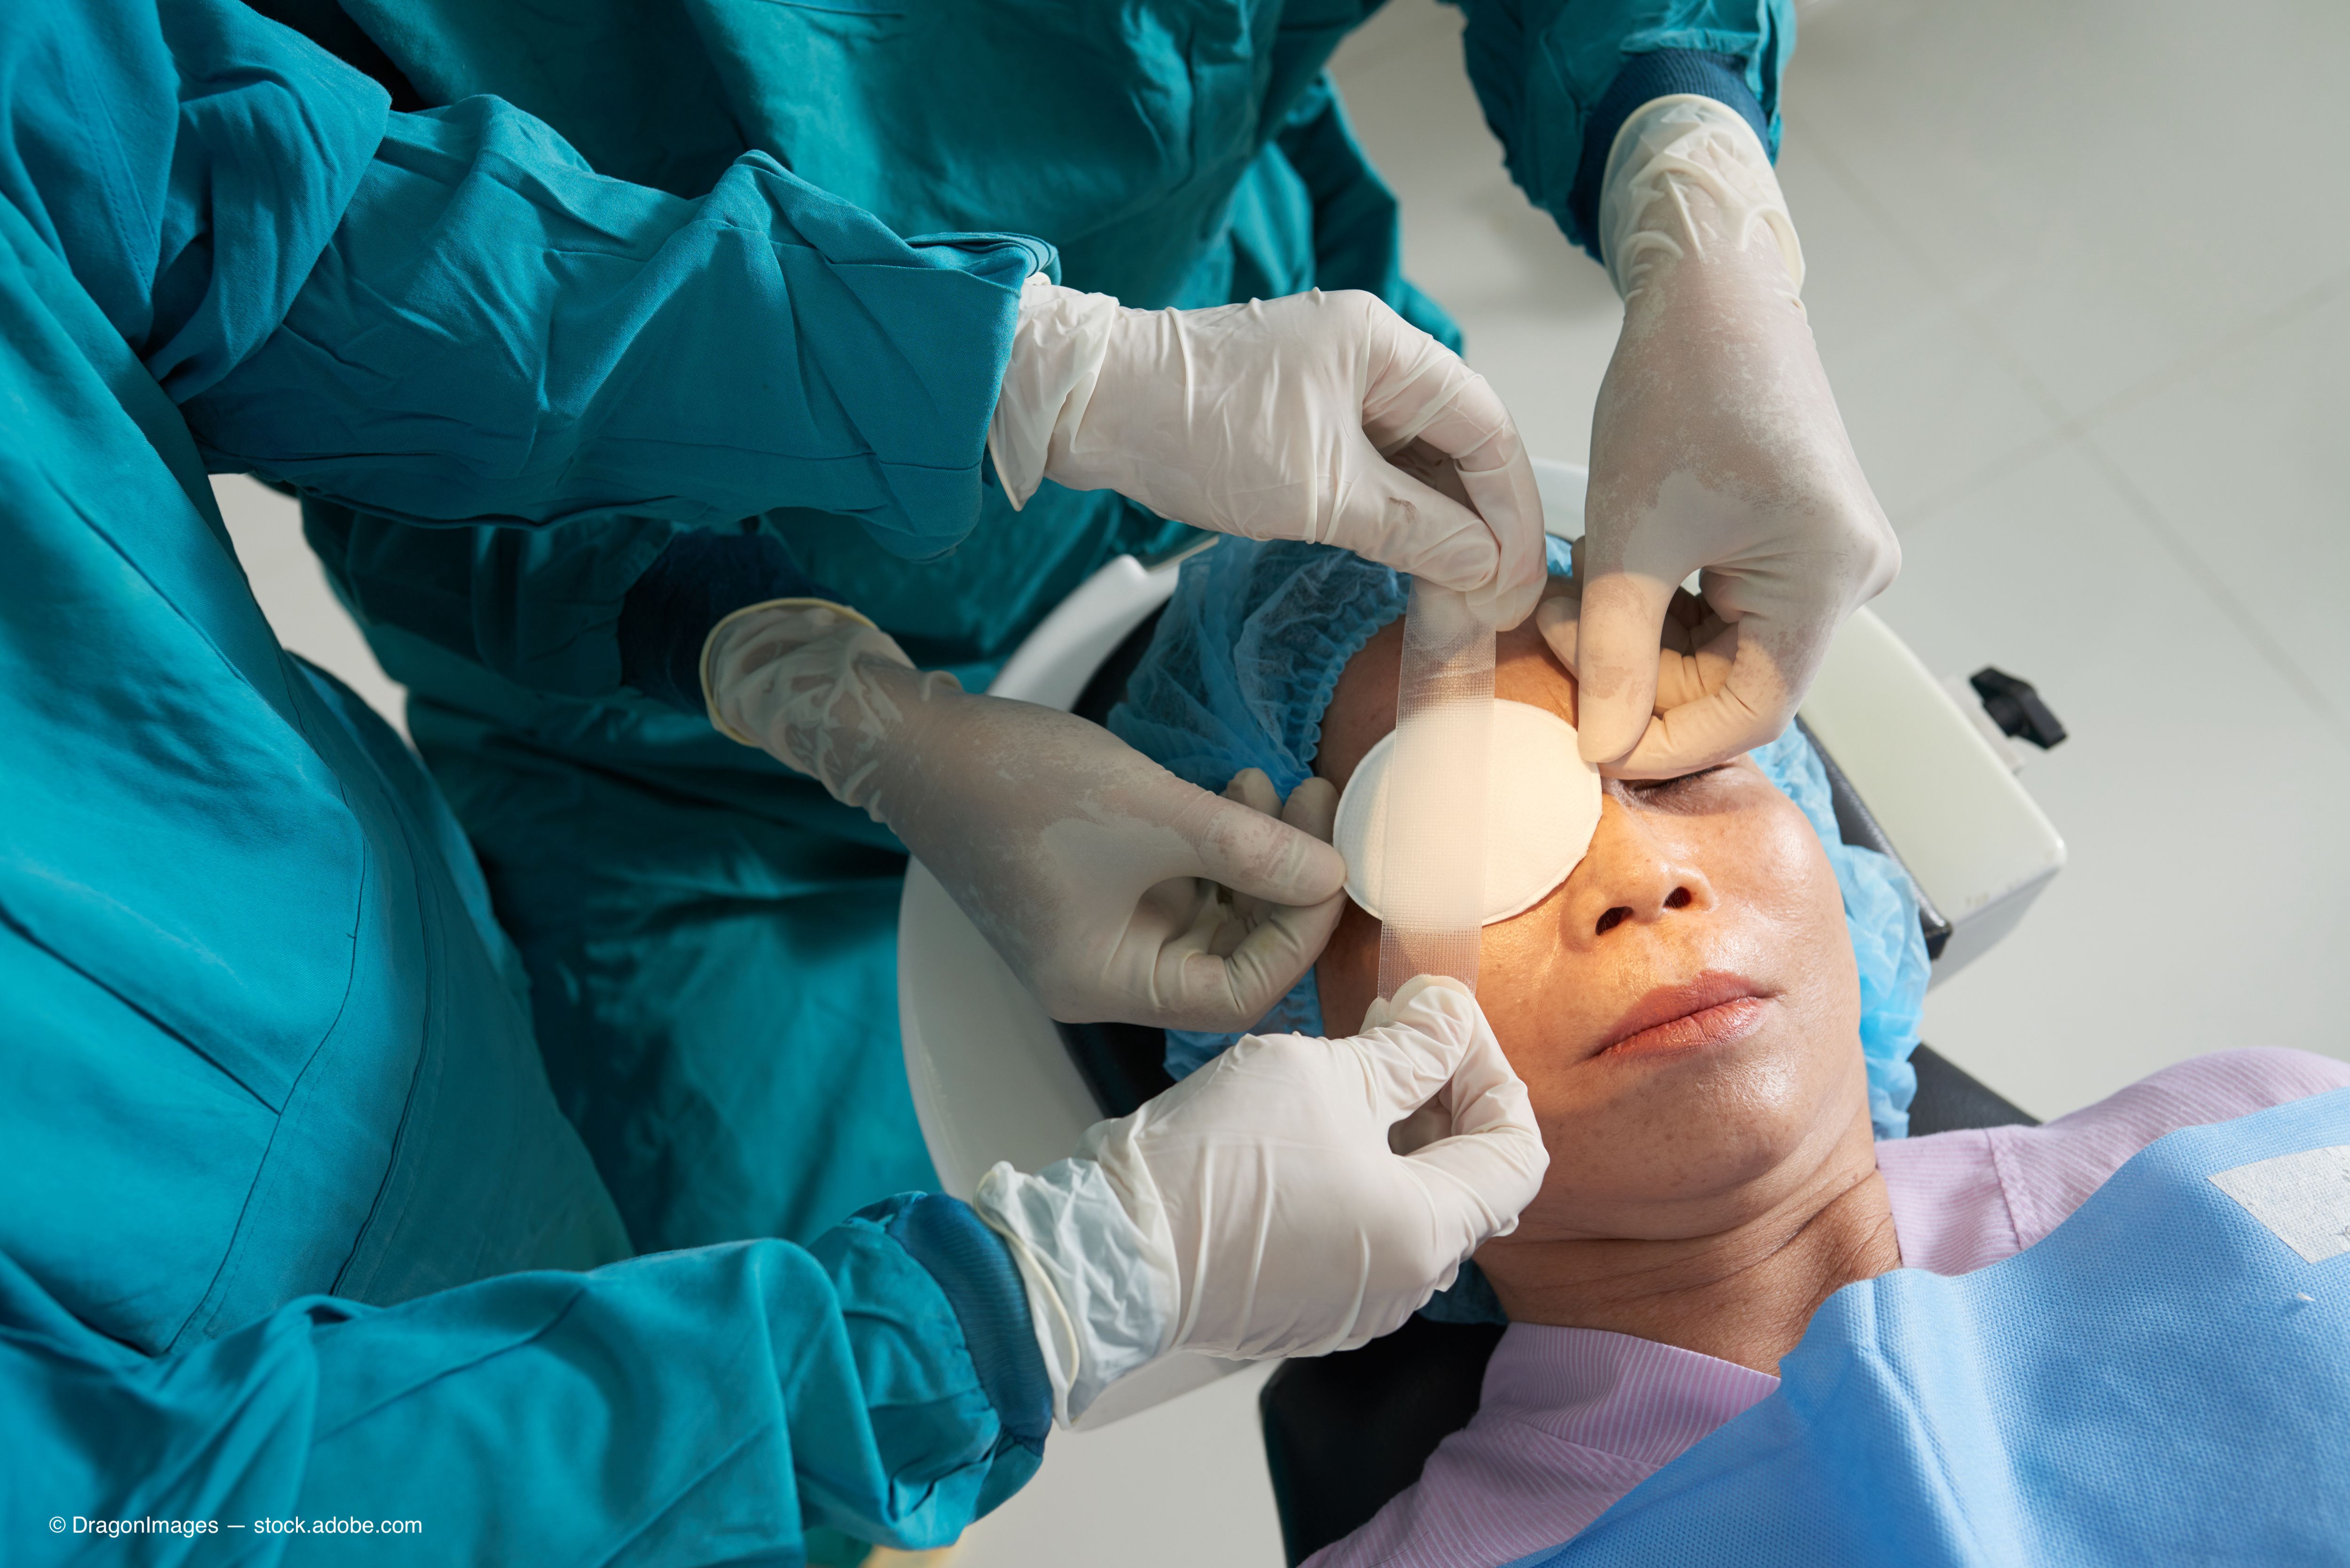 A narrative guide for cataract postoperative surgical care